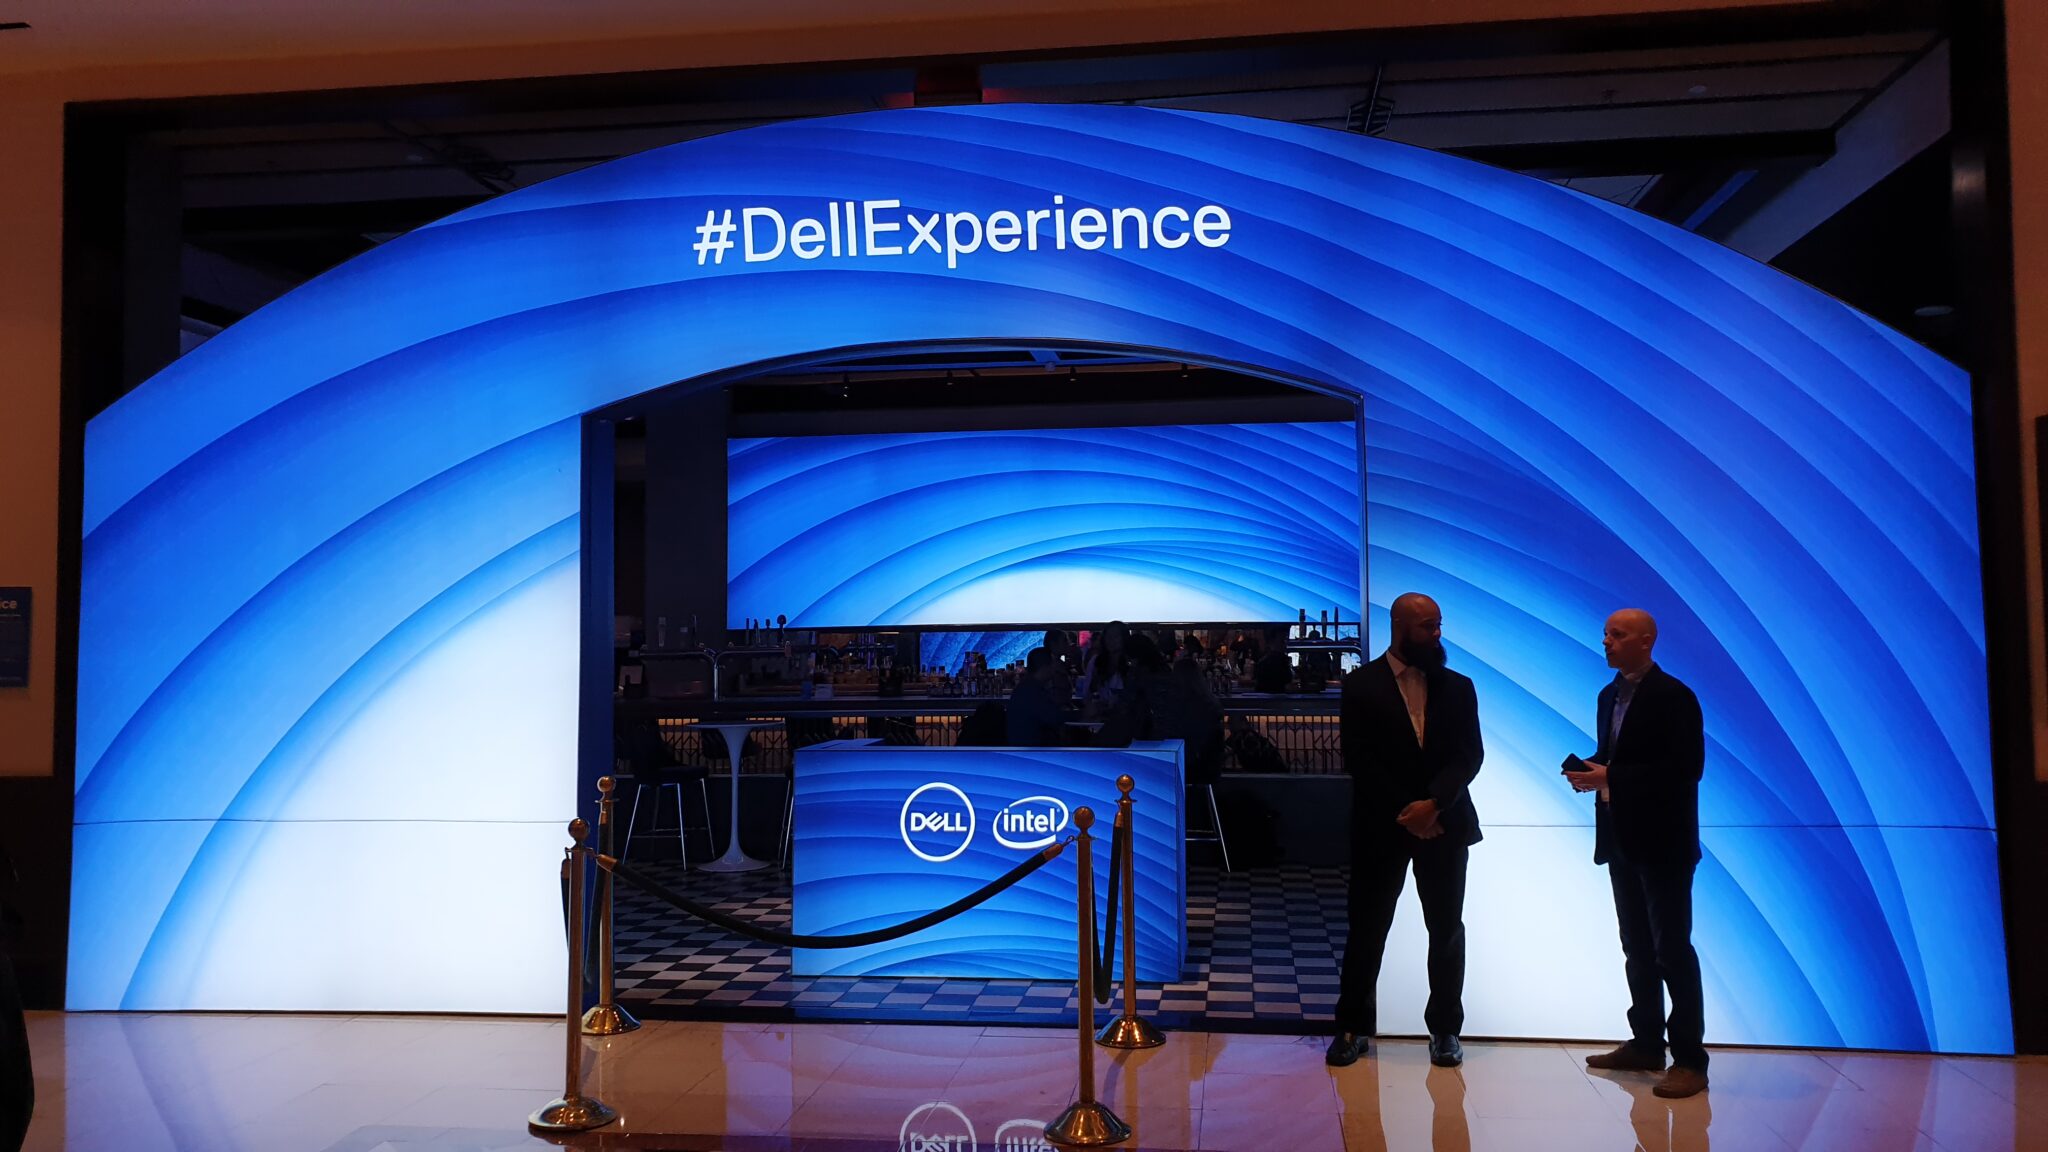 Dell experience